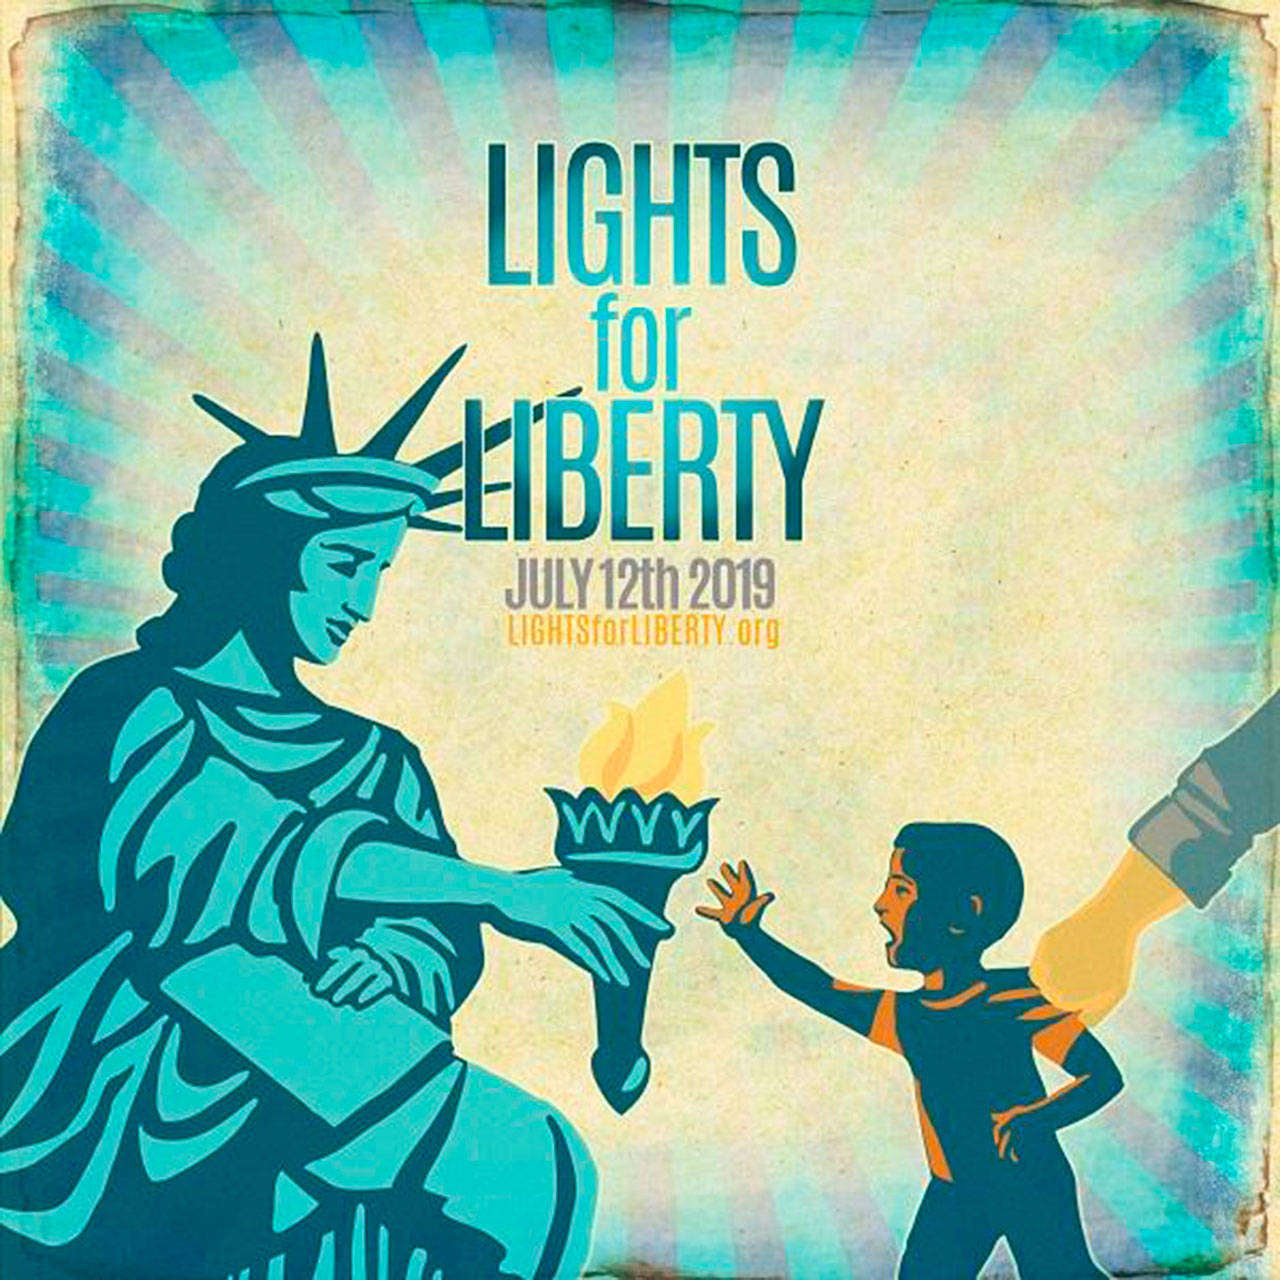 Lights for Freedom candlelight vigil for migrant crisis is Friday